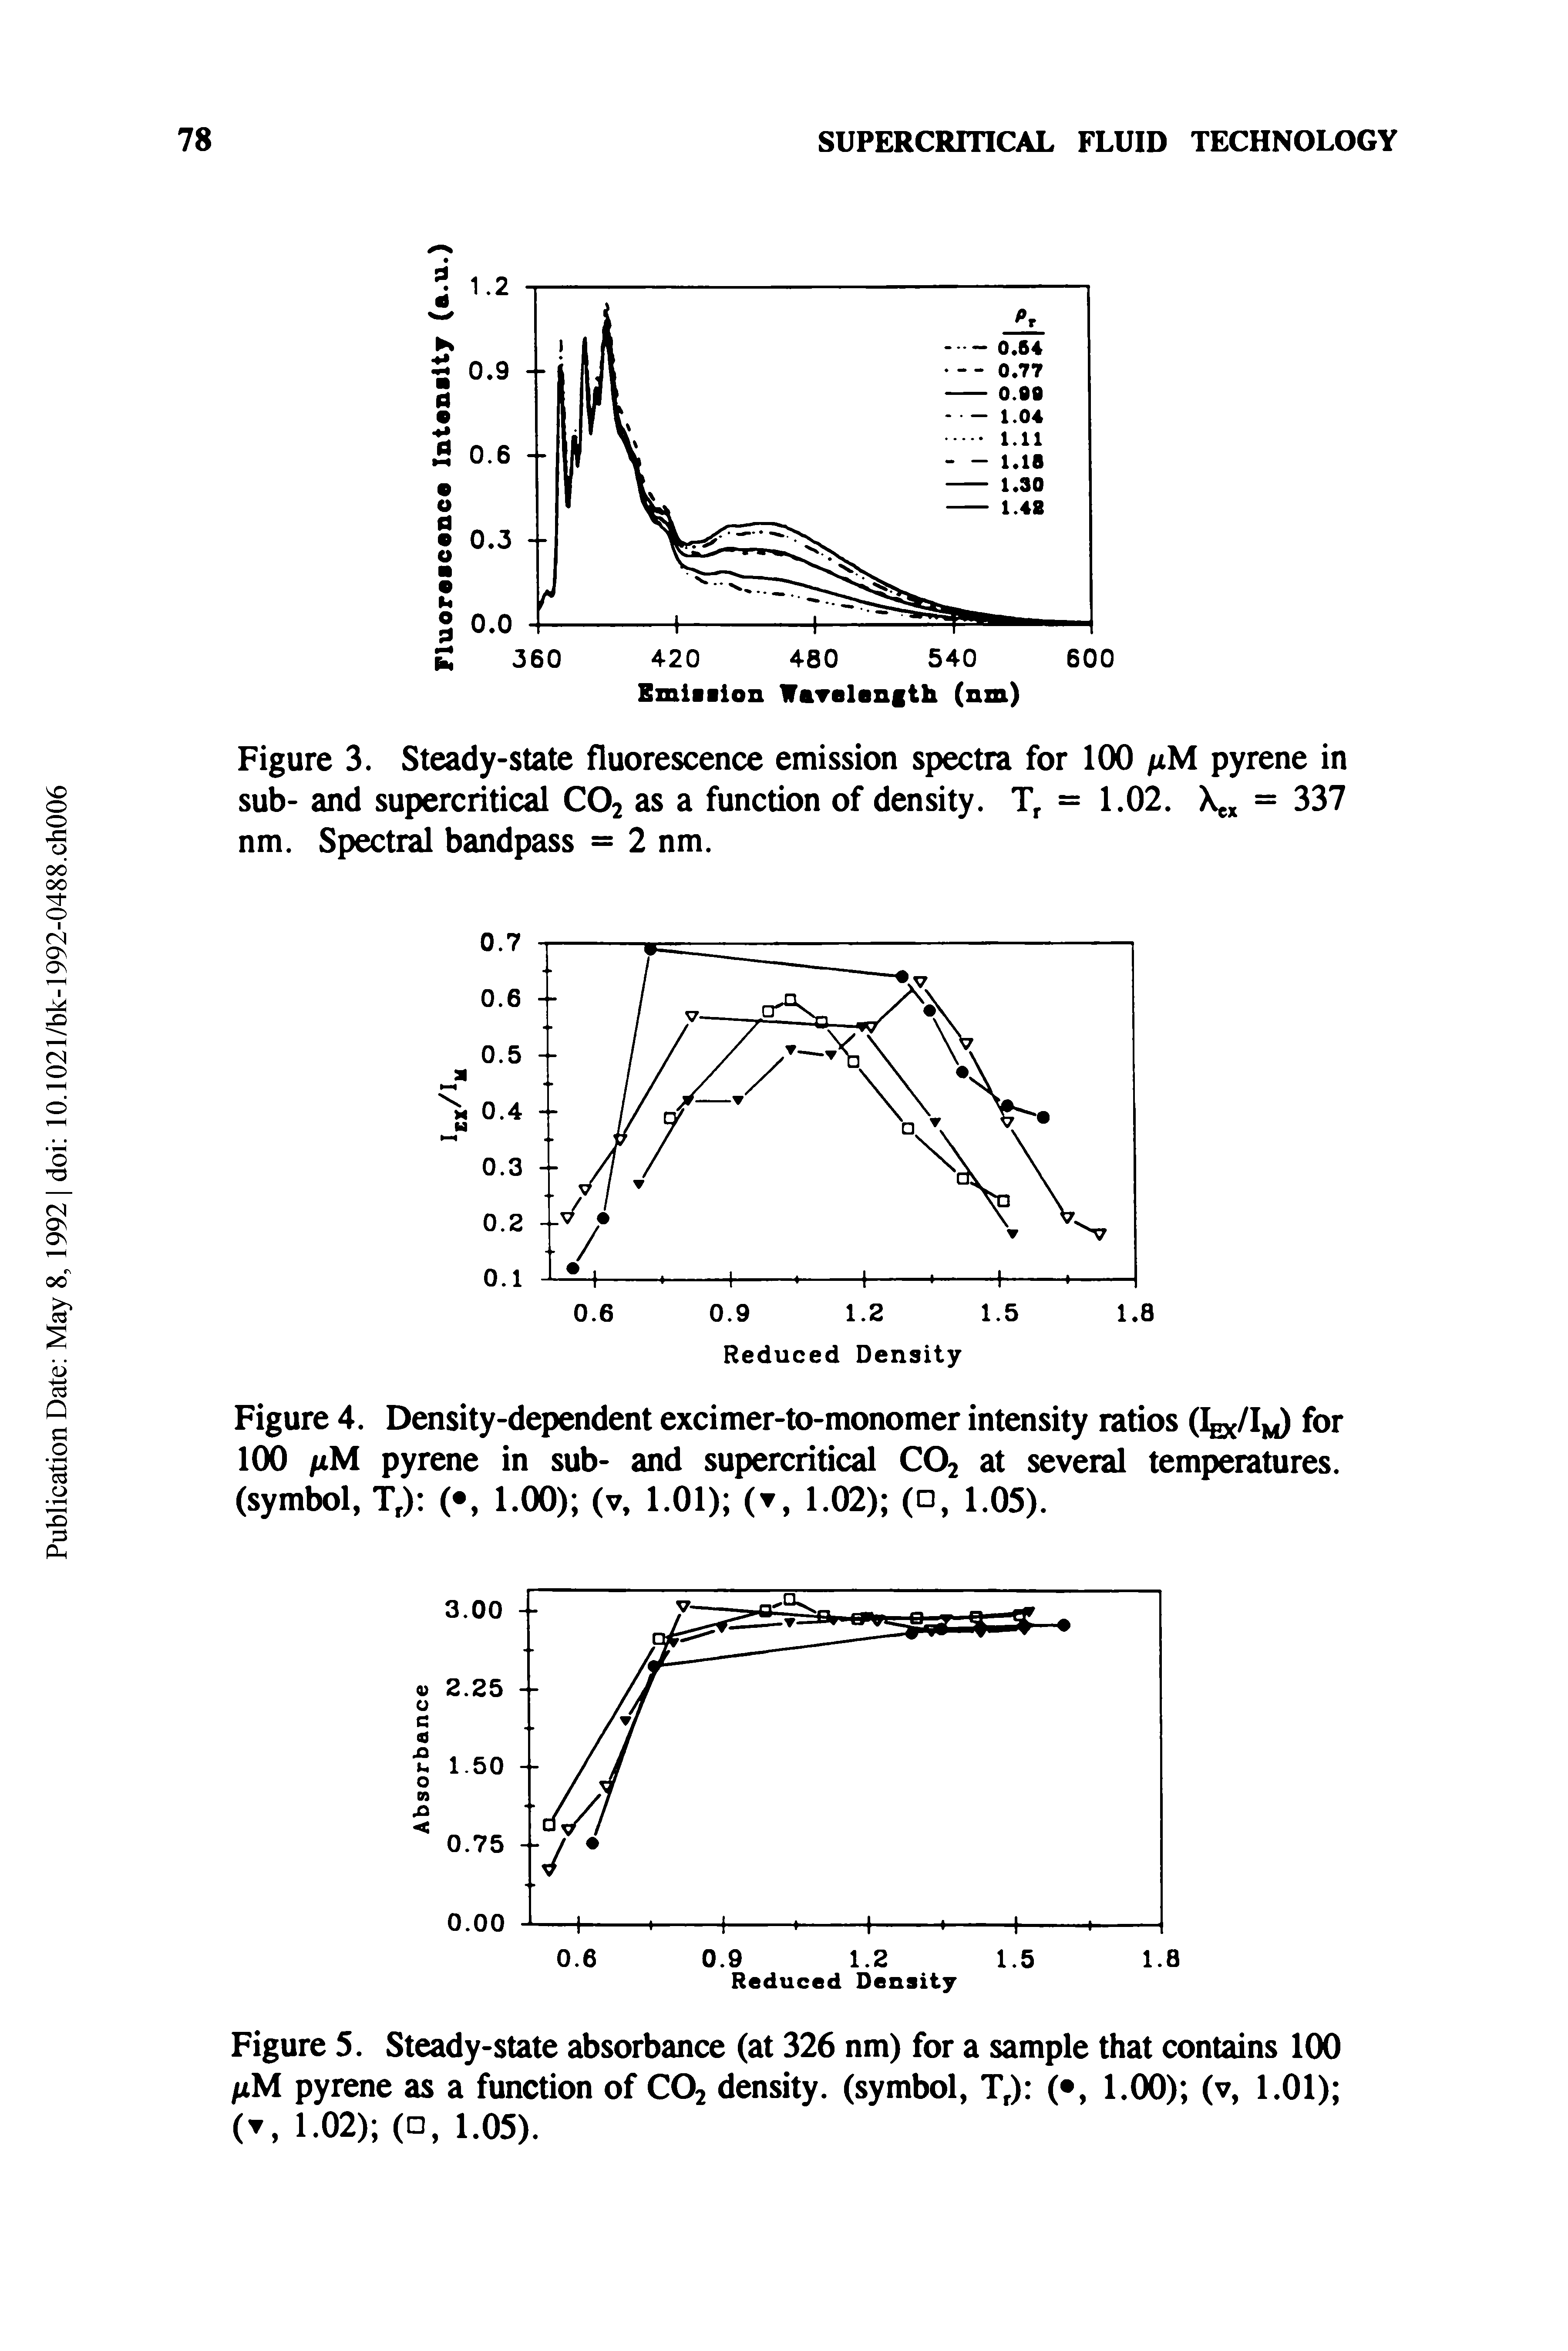 Figure 4. Density-dependent excimer-to-monomer intensity ratios (W m) for 100 /xM pyrene in sub- and supercritical C02 at several temperatures, (symbol, Tr) ( , 1.00) (v, 1.01) (t, 1.02) ( , 1.05).